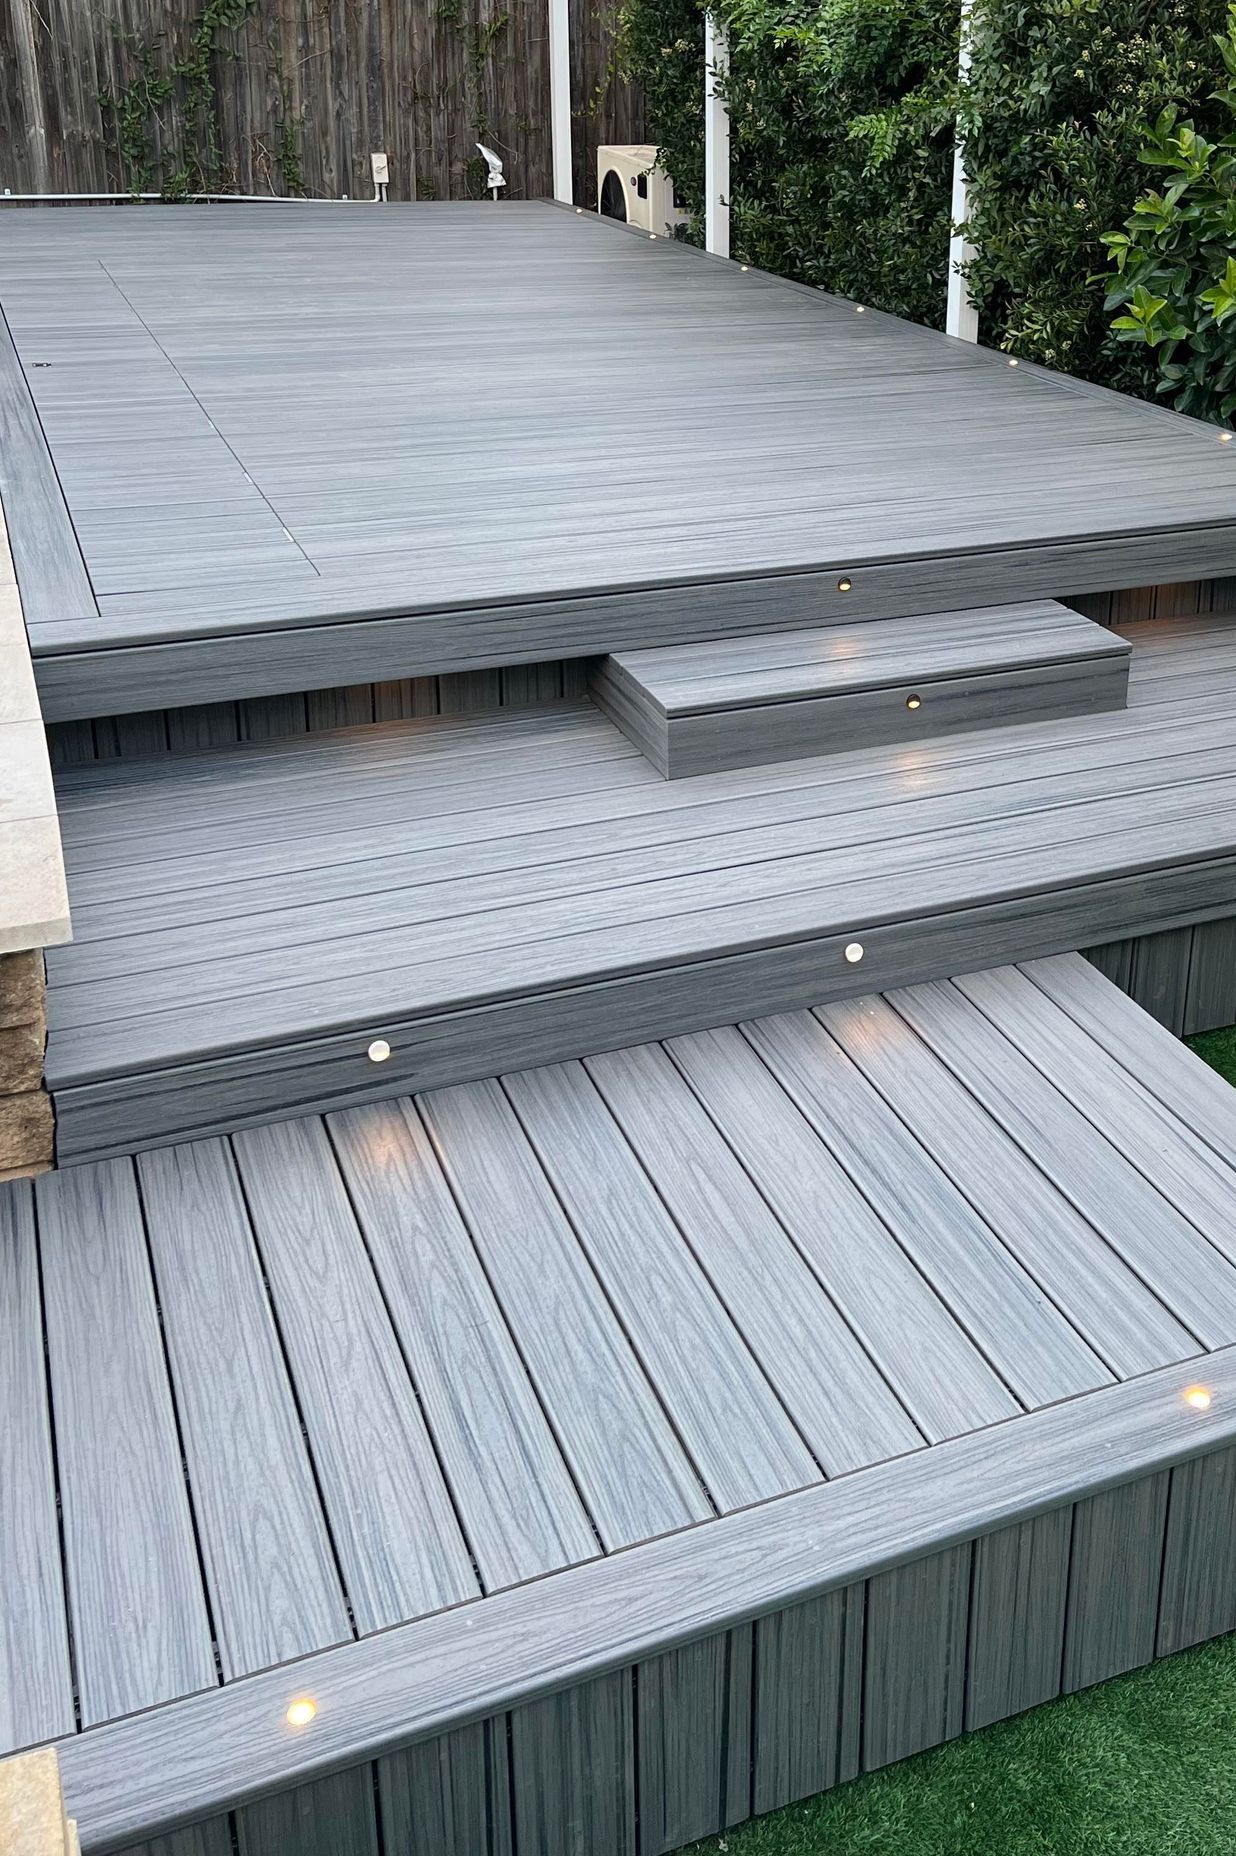 This composite timber deck shows the timber in-laid into the pool cover so that it's virtually invisible.